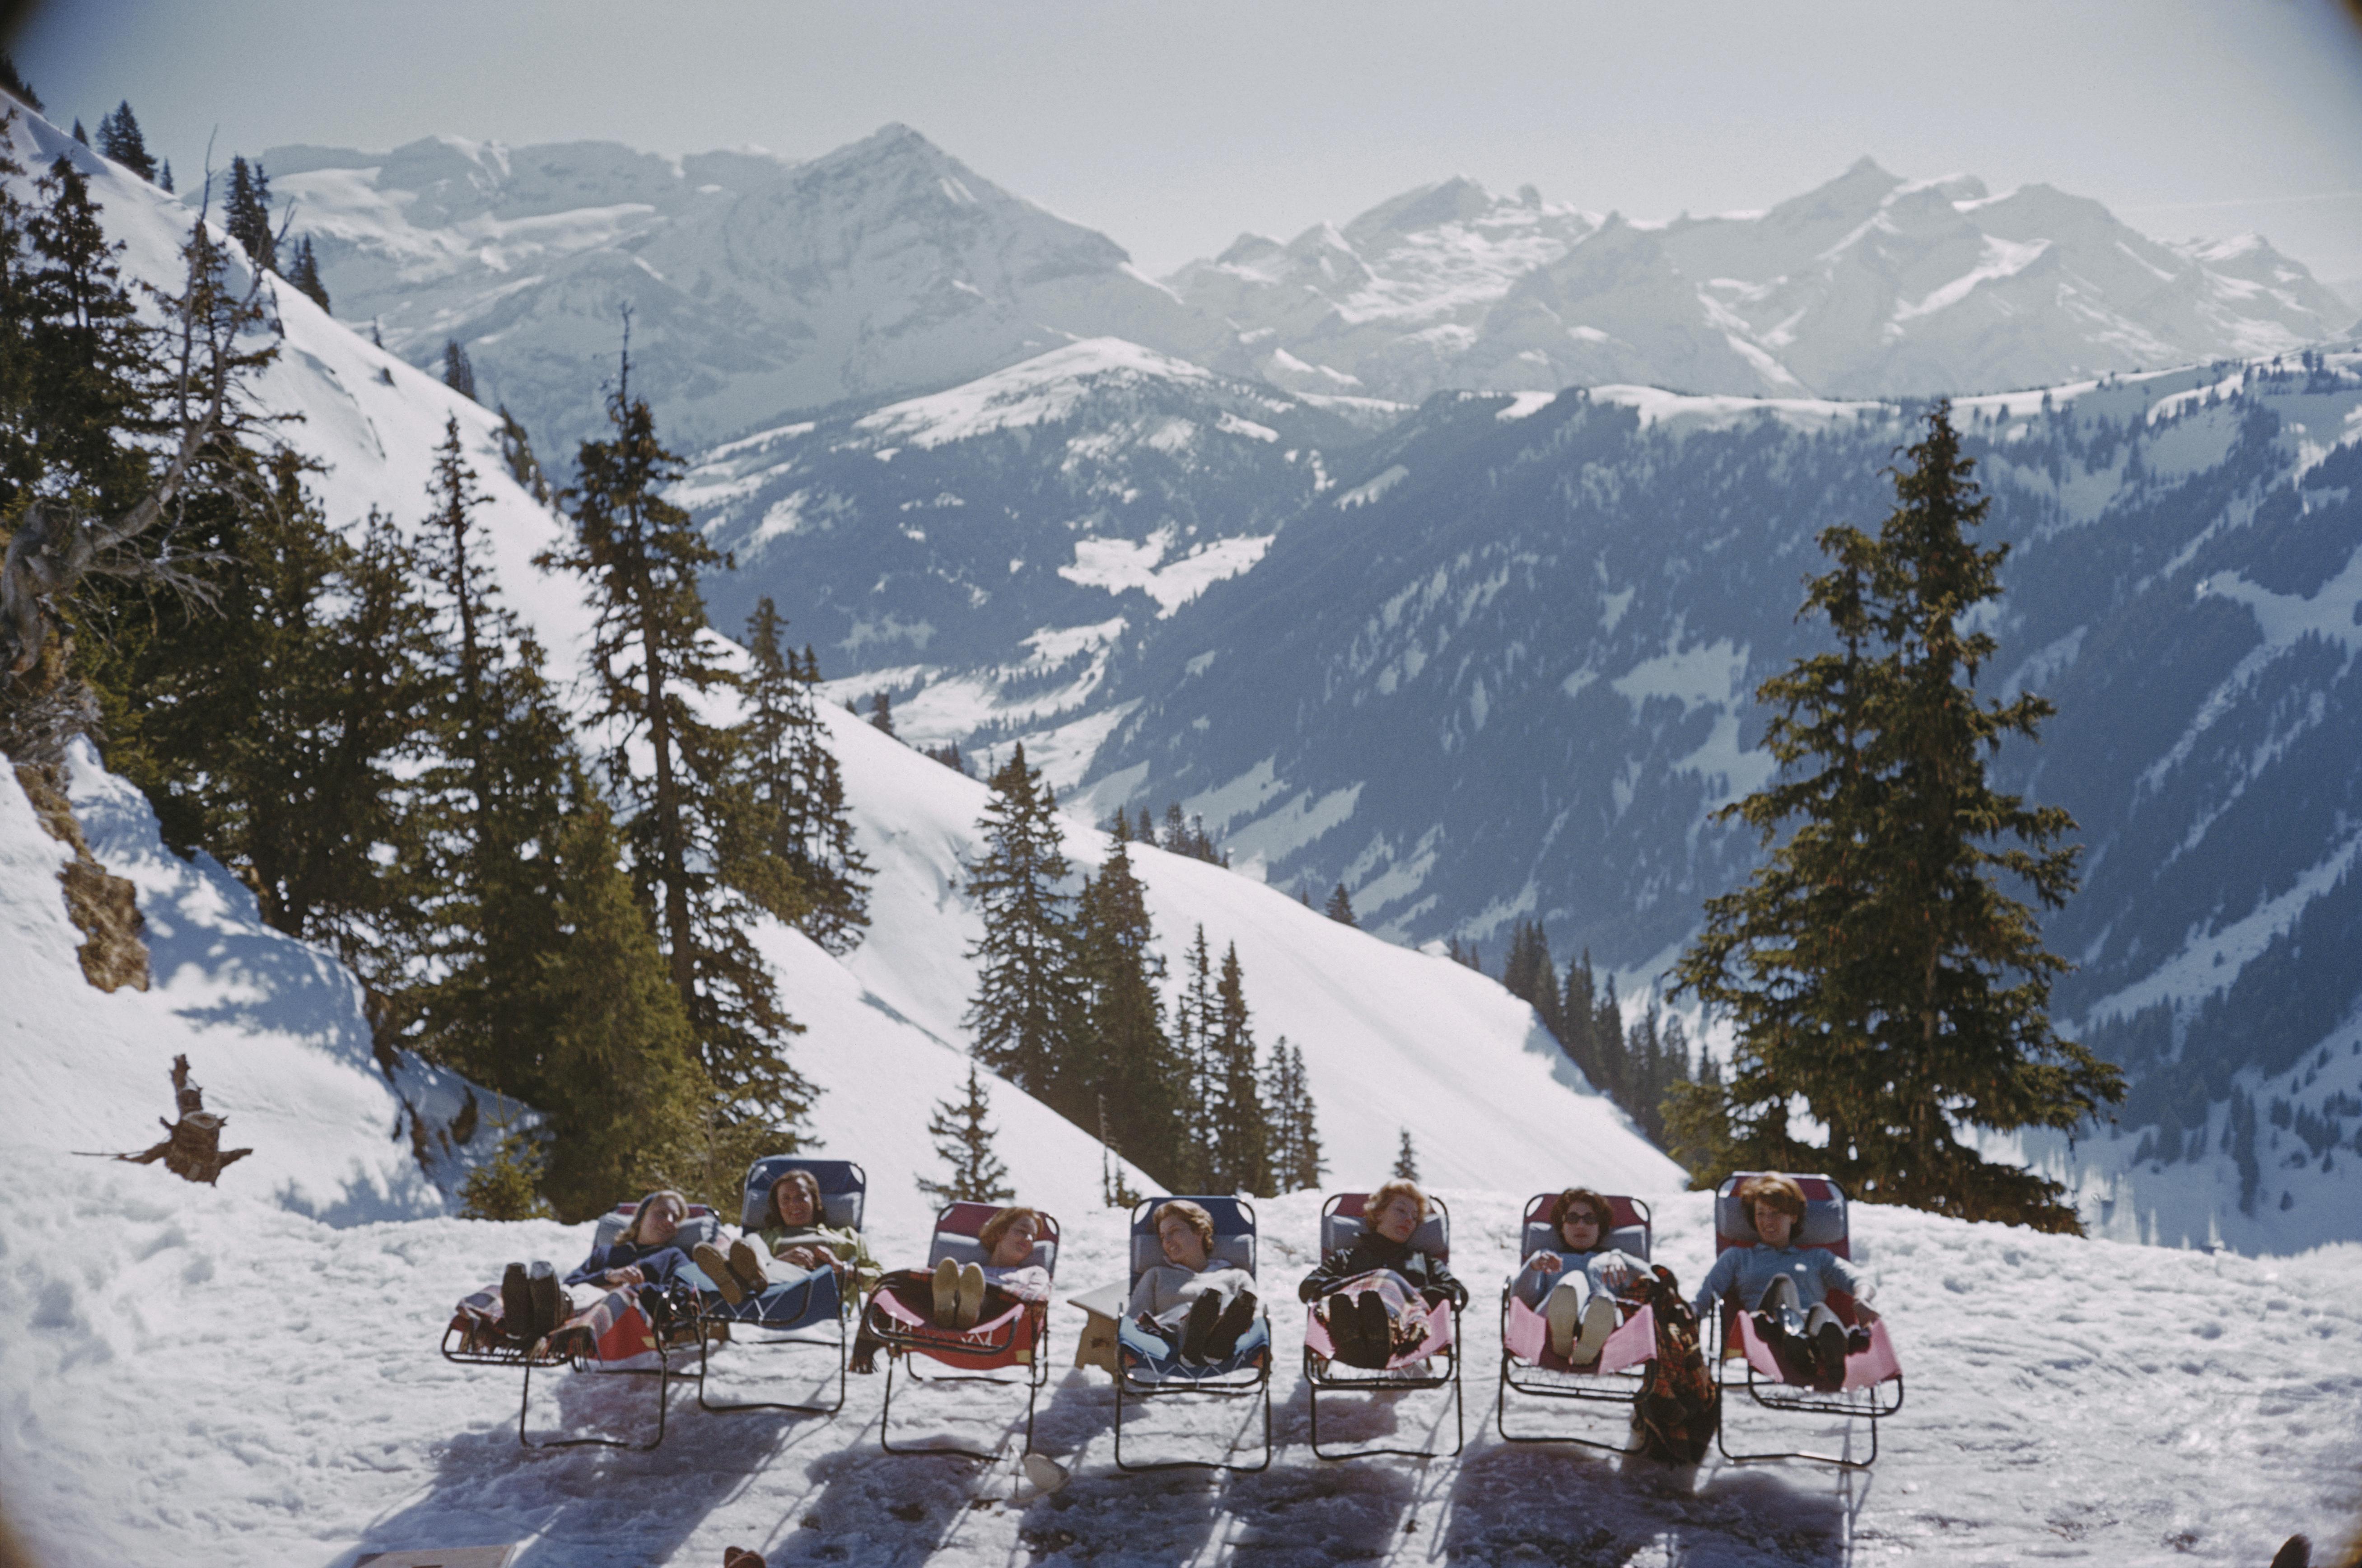 'Lounging In Gstaad' 1961 Slim Aarons Limited Estate Edition Print 

Holidaymakers in sun loungers on the slopes at at Gstaad, Switzerland, March 1961. 1961. (Photo by Slim Aarons/Hulton Archive/Getty Images)

Produced from the original